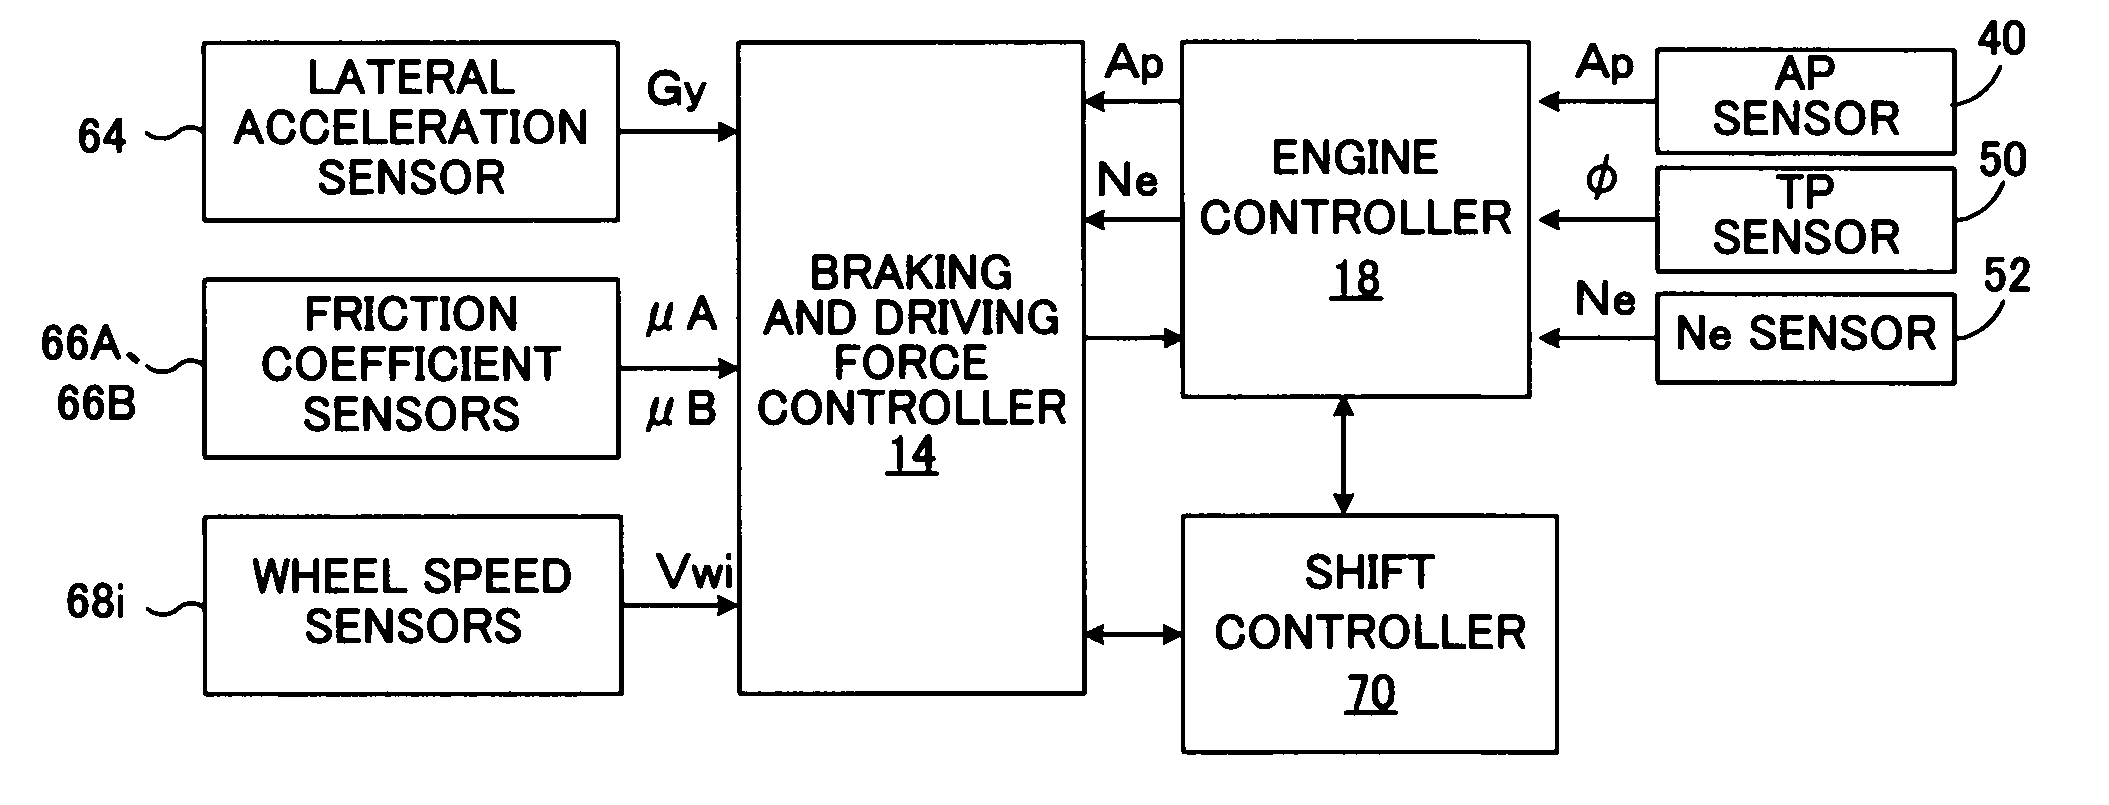 Driving force controller for vehicle